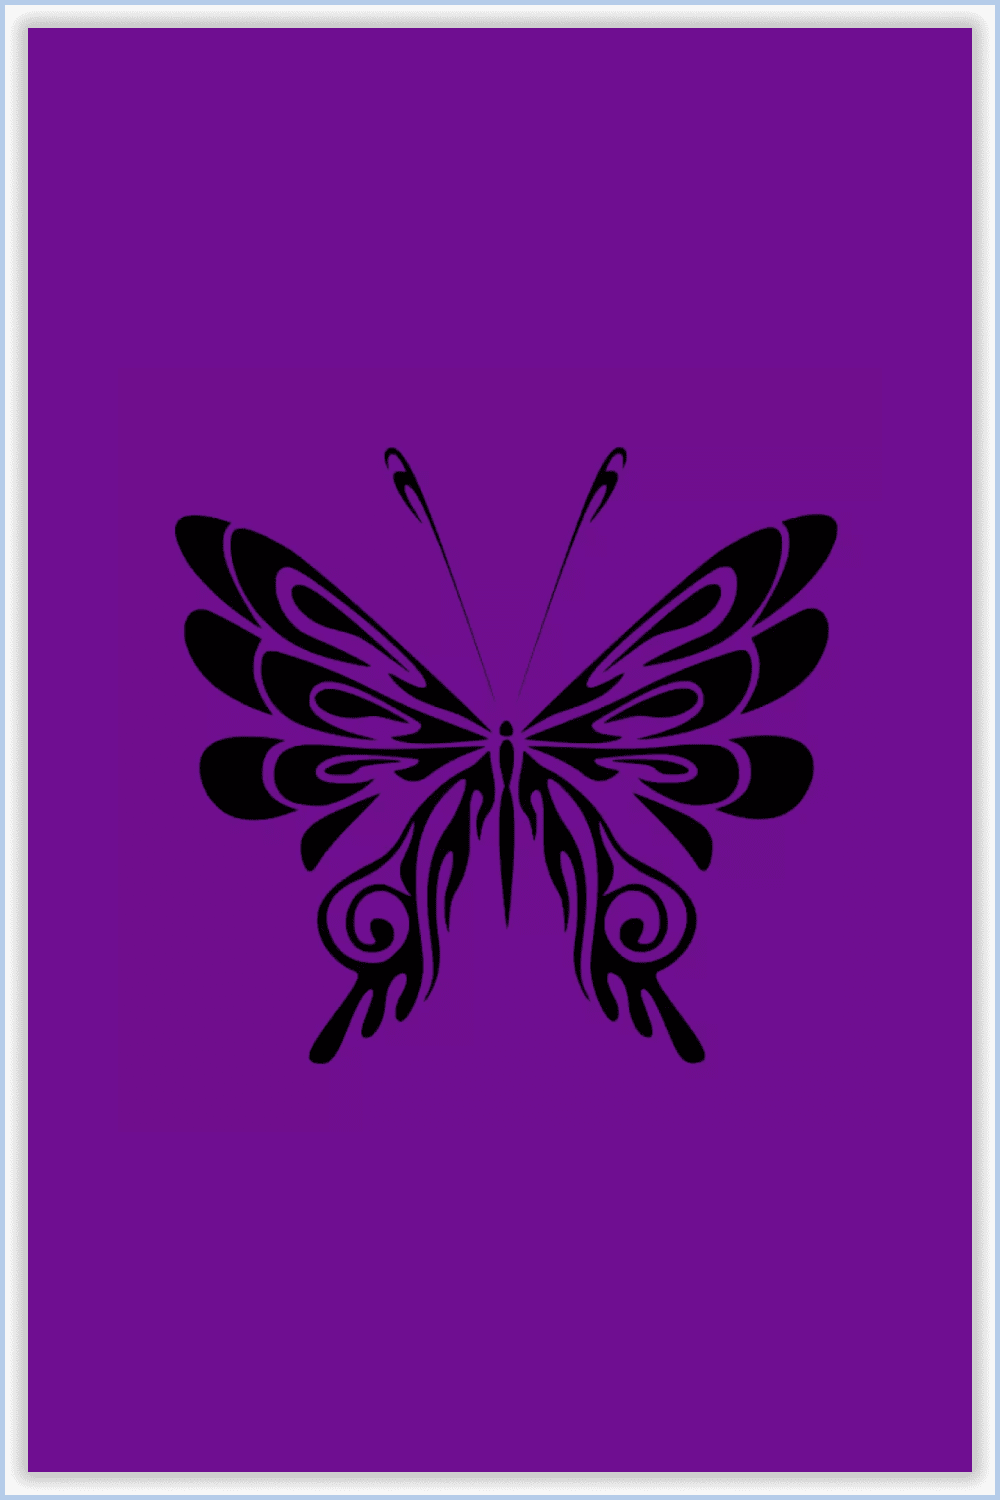 Black silhouette of a butterfly with long whiskers on a purple background.